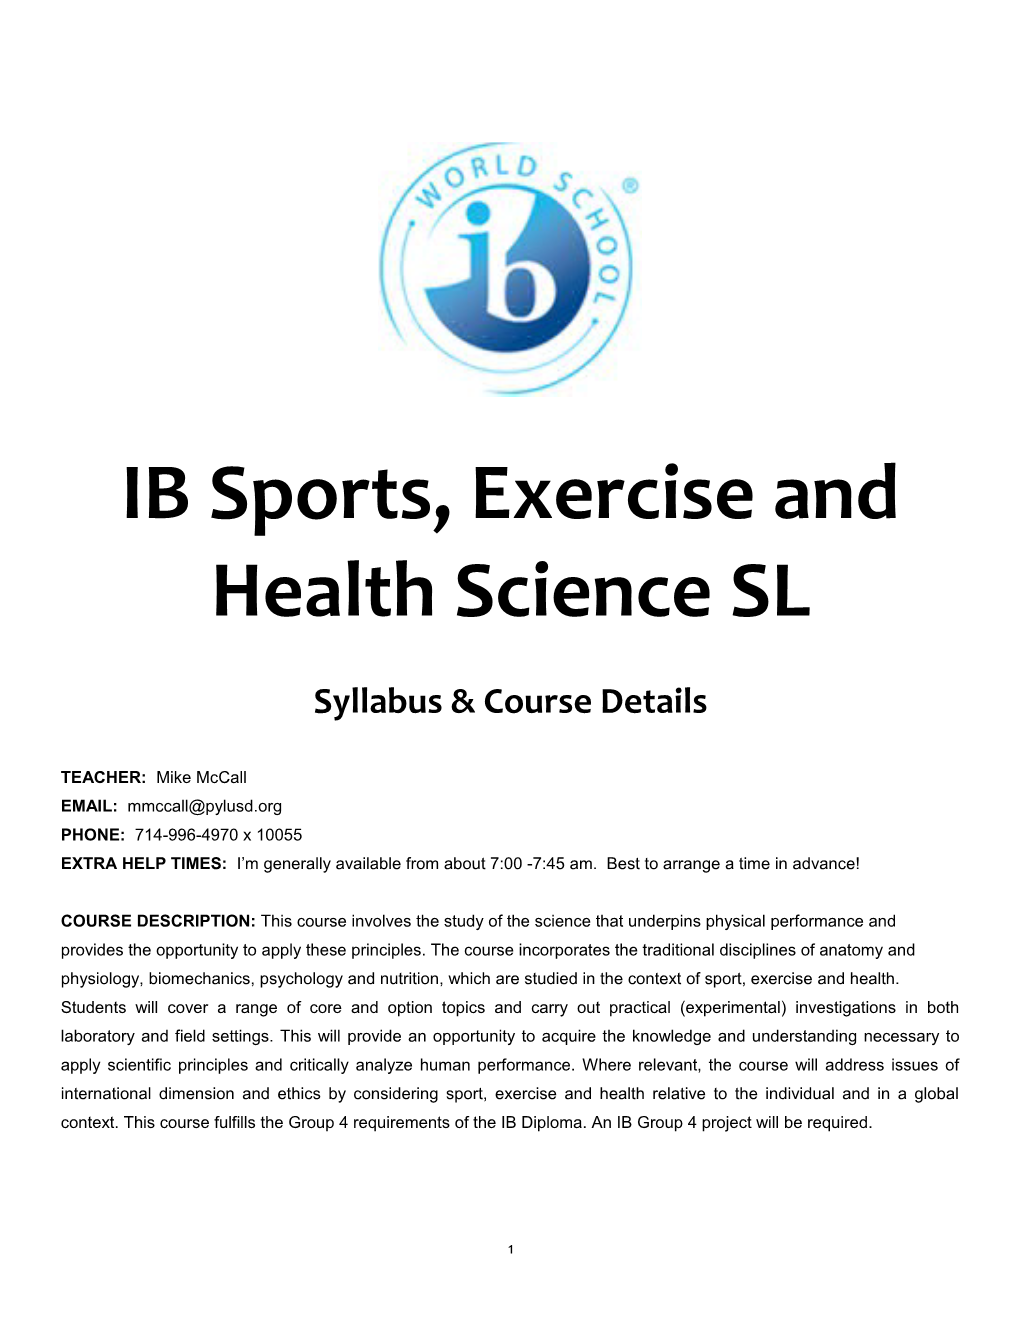 IB Sports, Exercise and Health Science SL